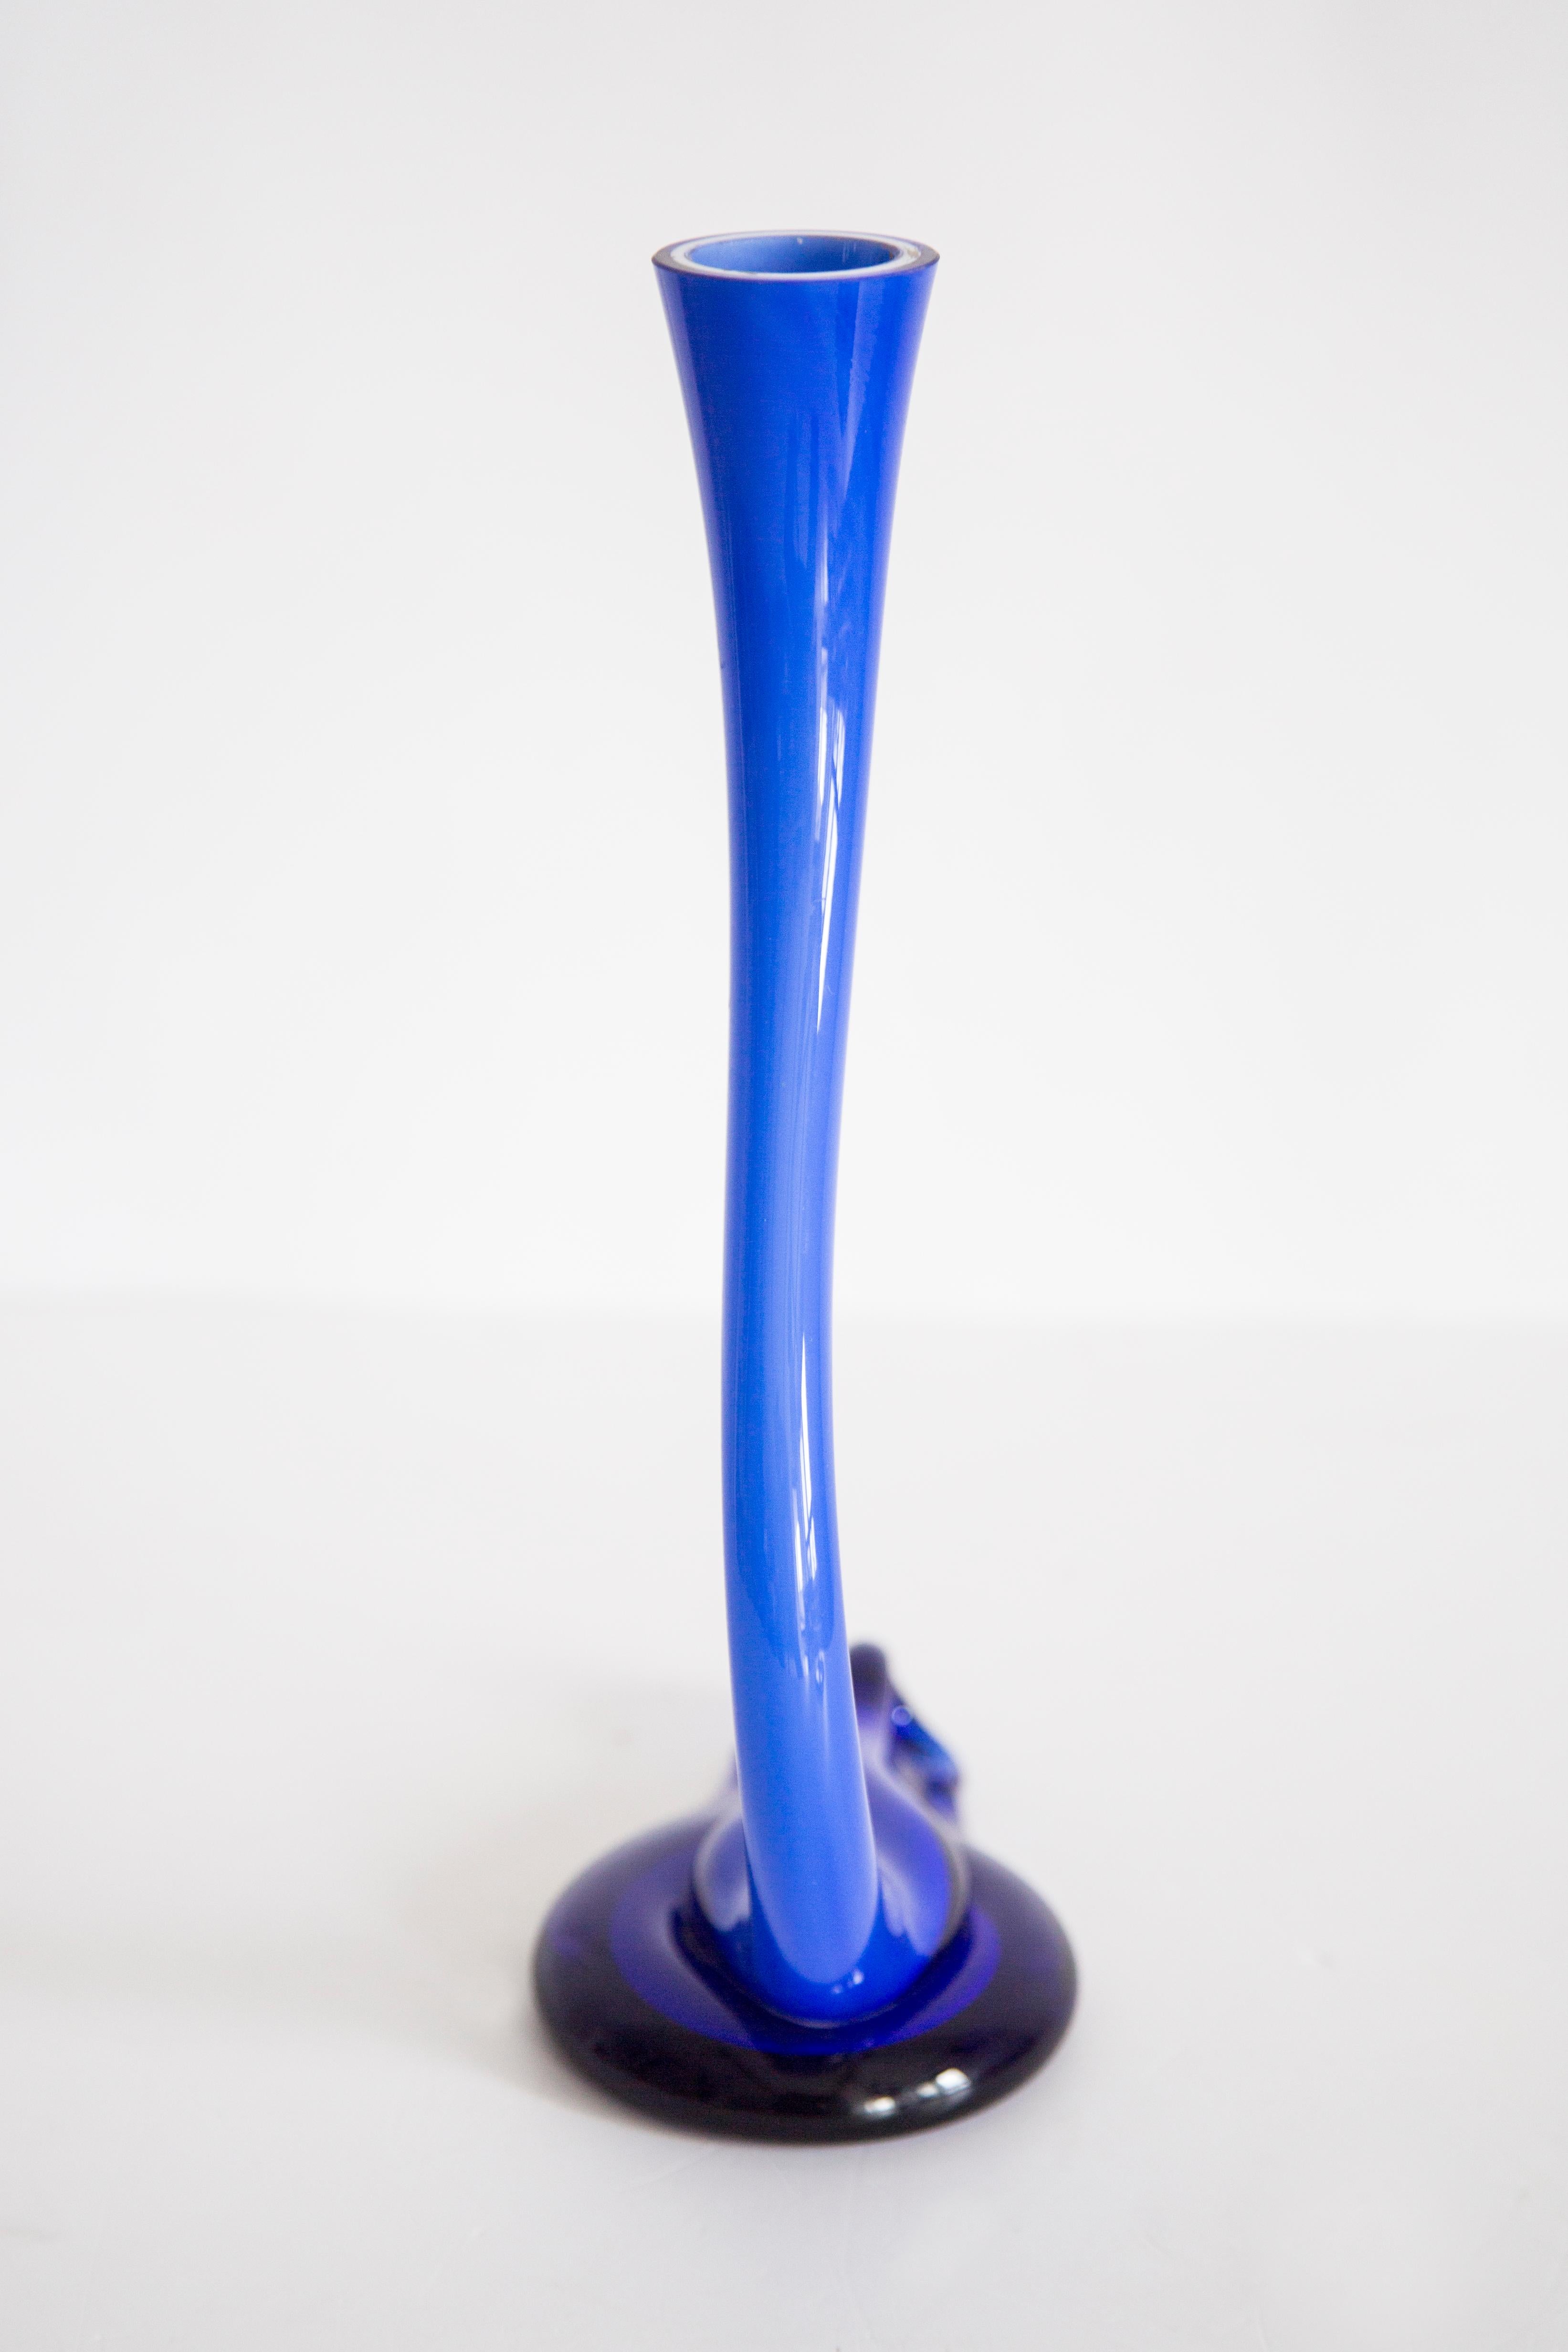 Mid Century Blue Artistic Twisted Vase, Europe, 1960s For Sale 4